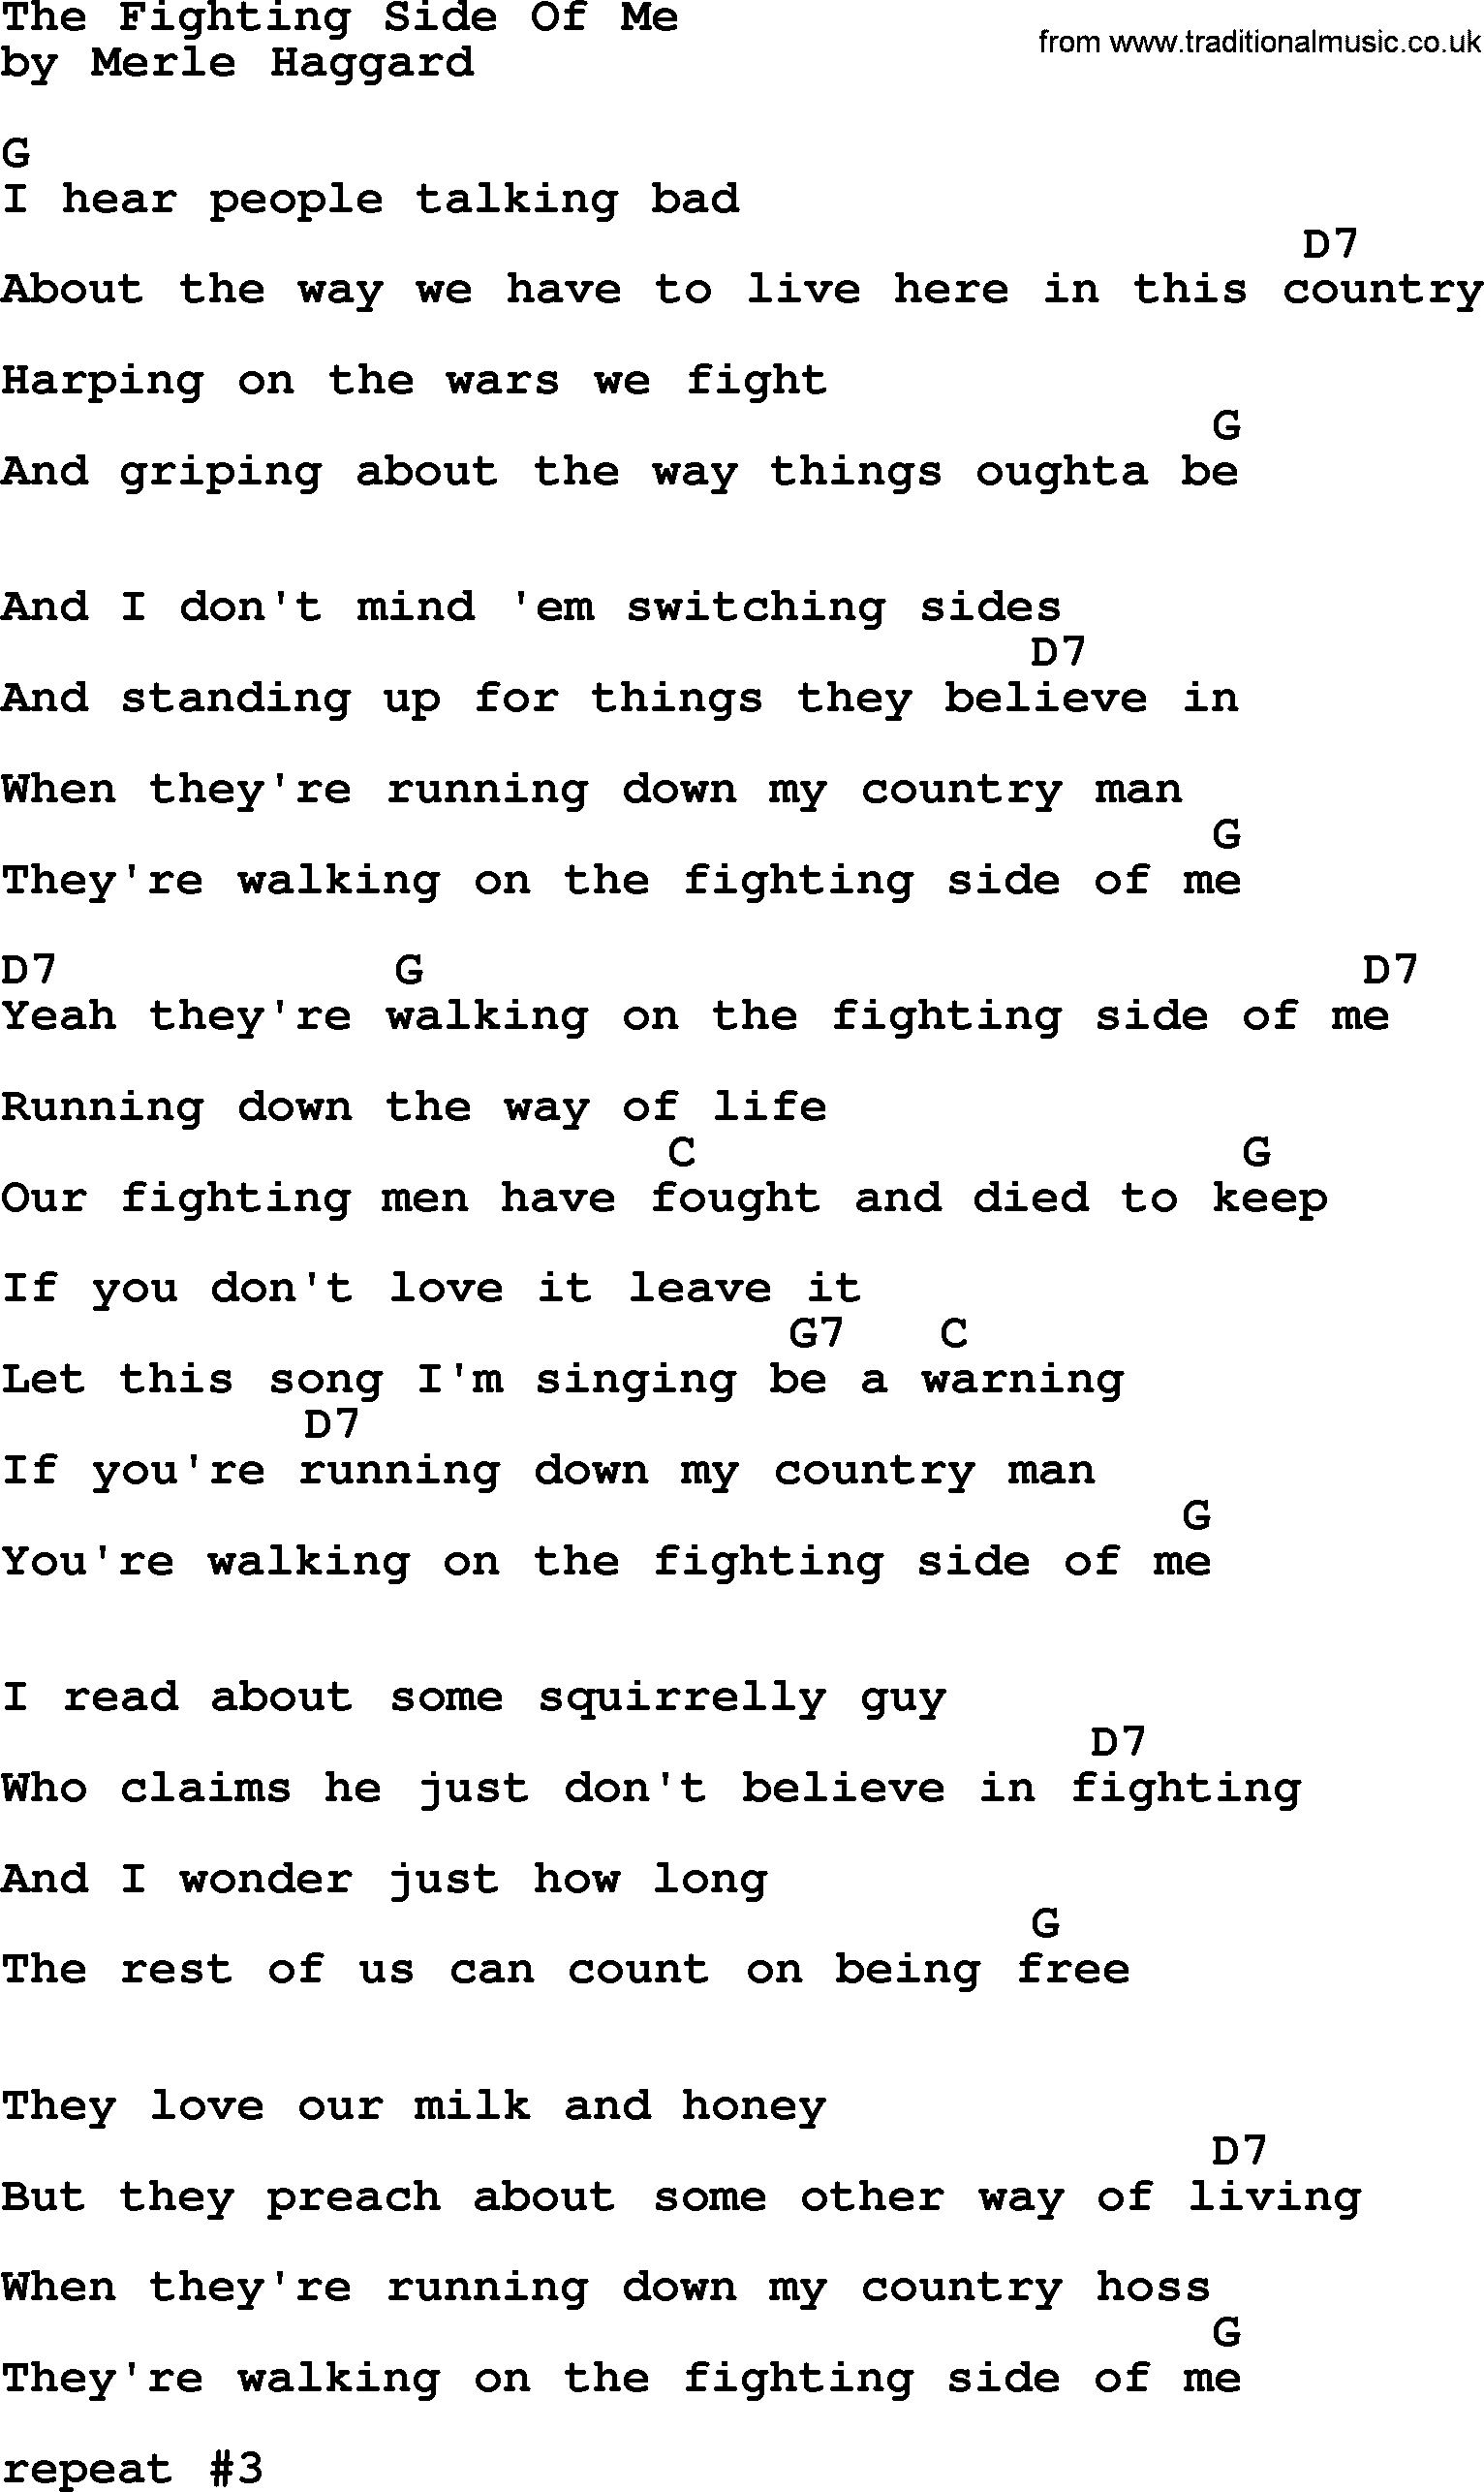 Merle Haggard song: The Fighting Side Of Me, lyrics and chords